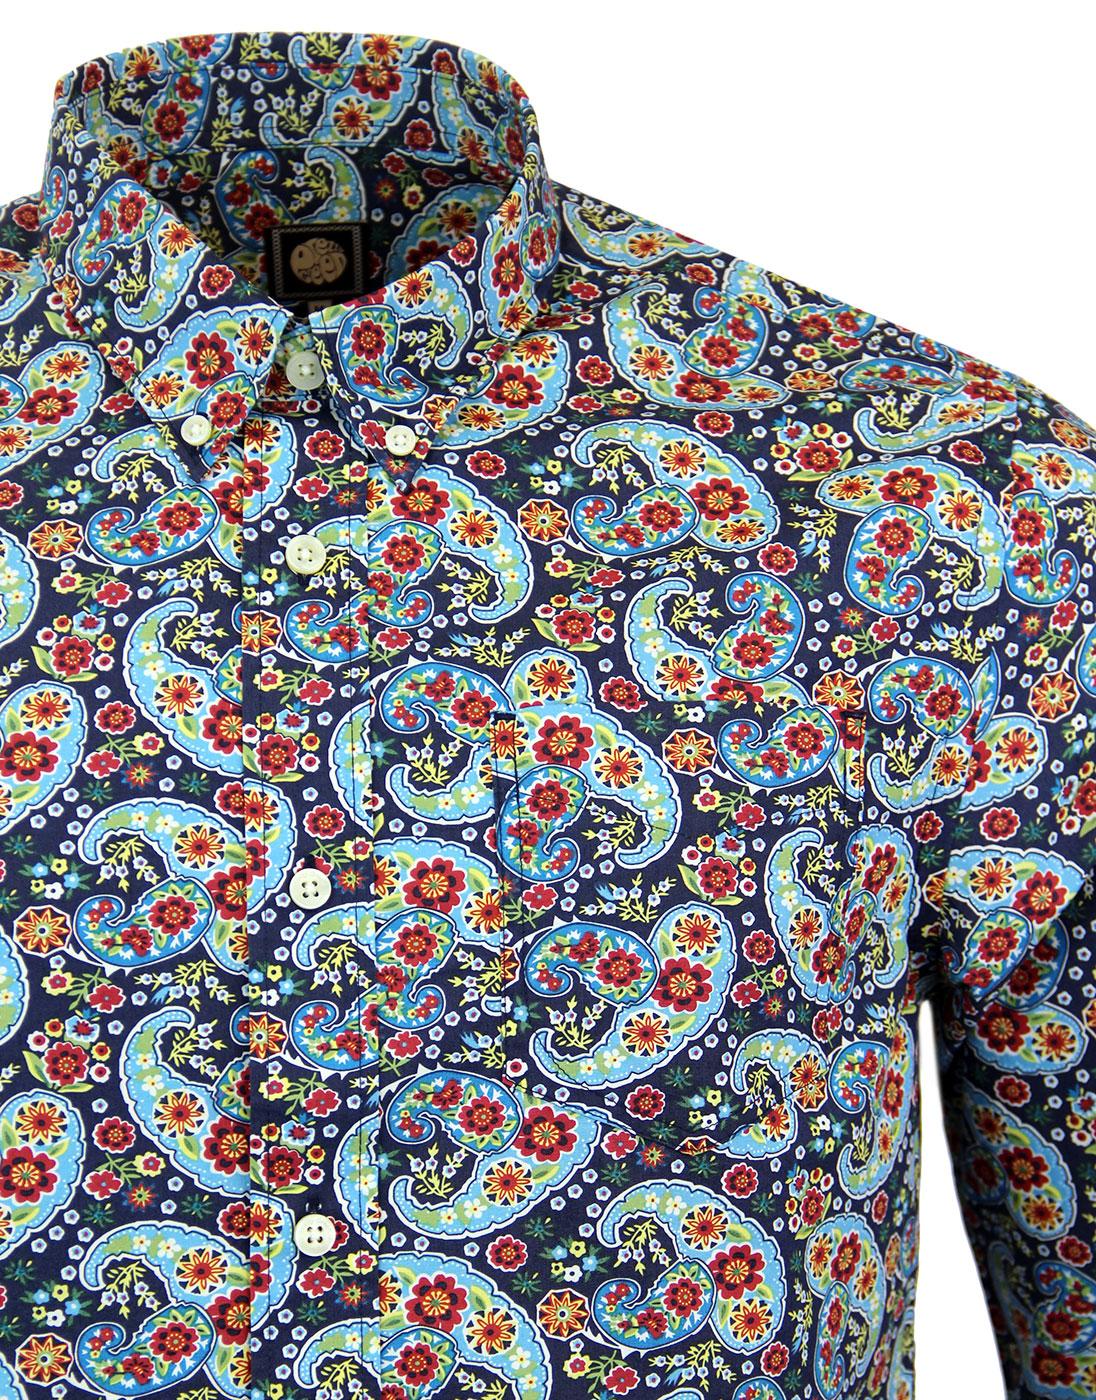 PRETTY GREEN Alvey Retro 60s Mod Floral Paisley Psychedelic Shirt